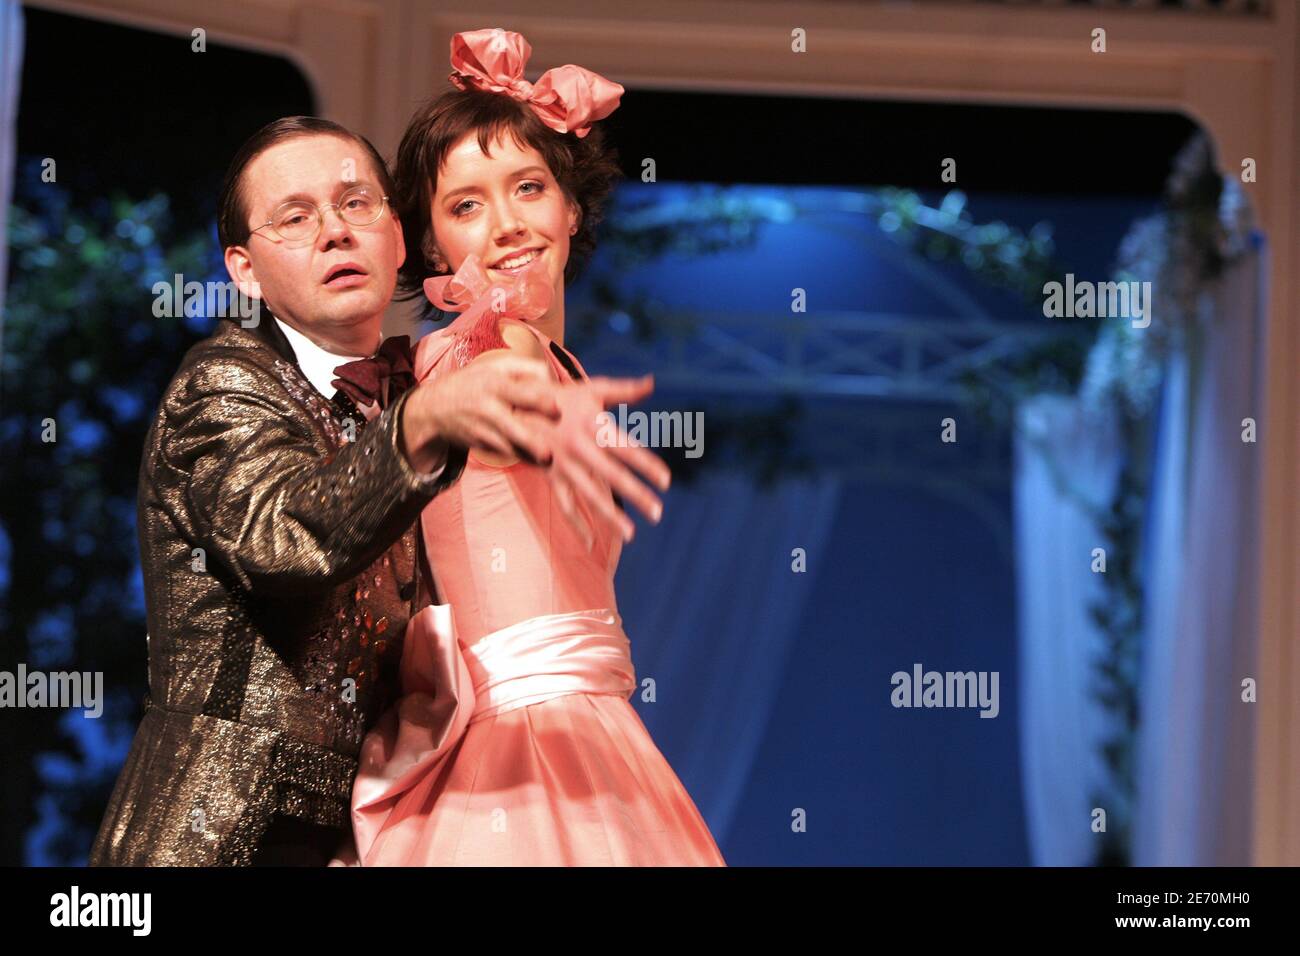 French actress Sara Giraudeau (daughter of French actors Bernard Giraudeau and Anny Duperey) and Patrick Haudecoeur perform in Patrick Haudecoeur's play ' La Valse des Pingouins' at the Theatre des Nouveautes in Paris, France on january 10, 2007. Photo by Mousse/ABACAPRESS.COM Stock Photo